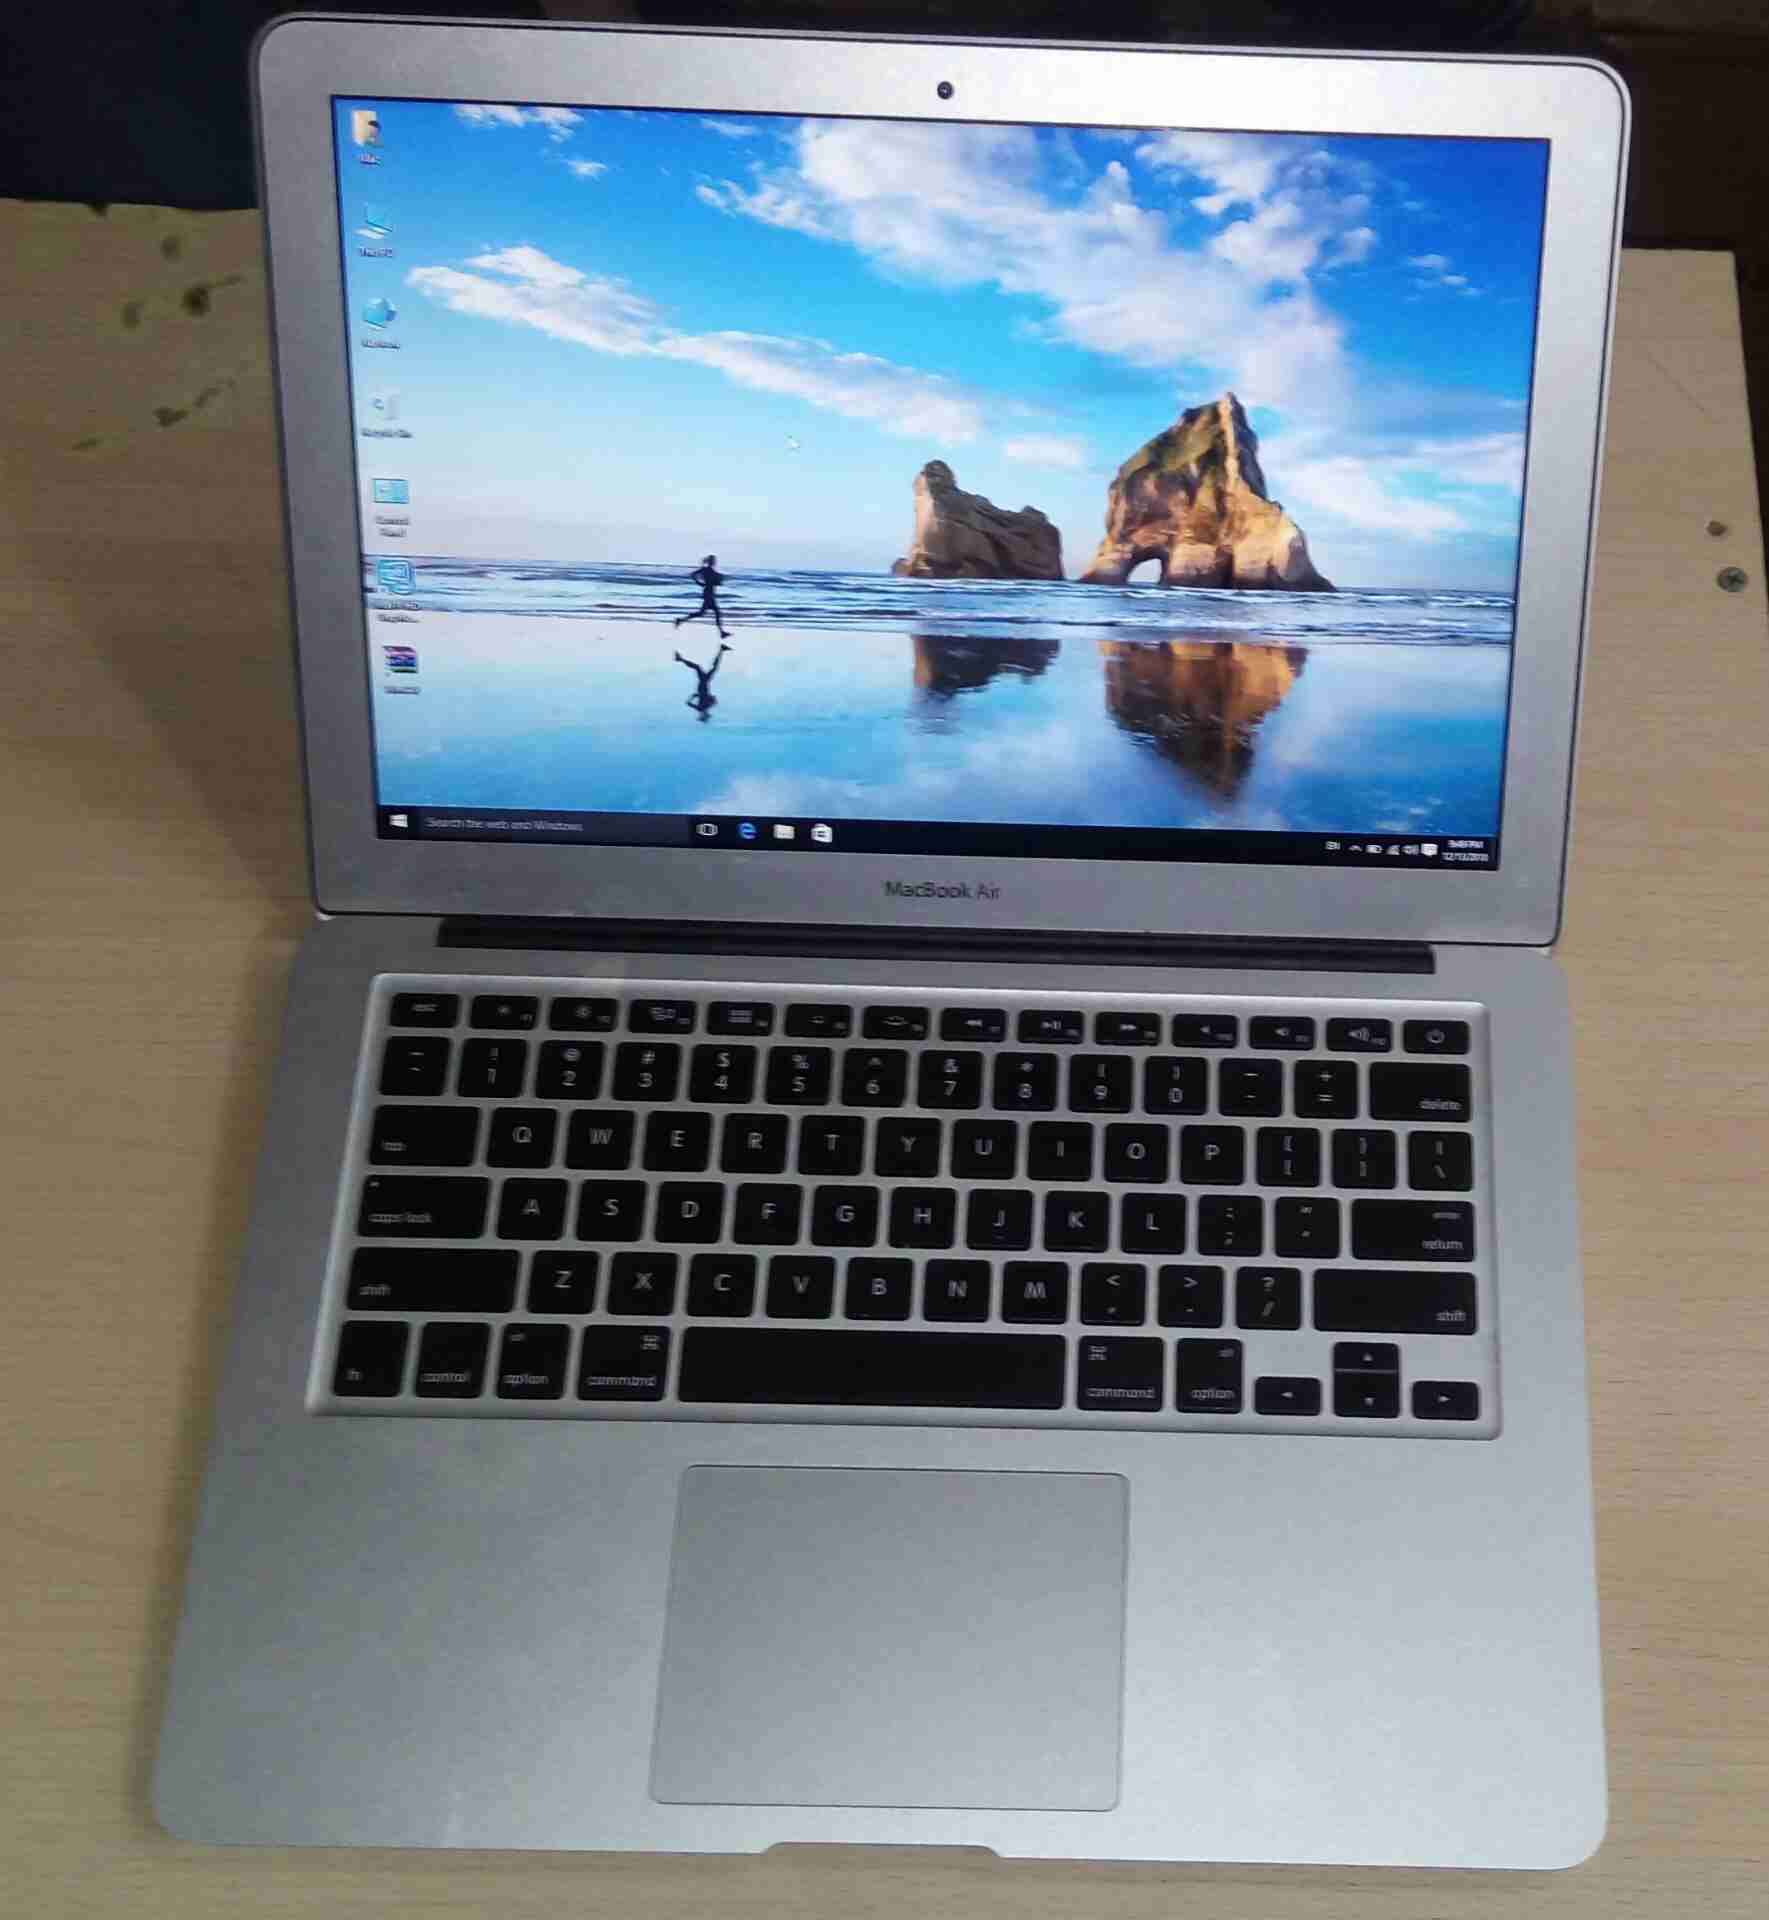 DELL ATG CORE i5 LAPTOP RARLEY USED IN GOOD WORKING CONDITION-  Macbook air core i5 لا...